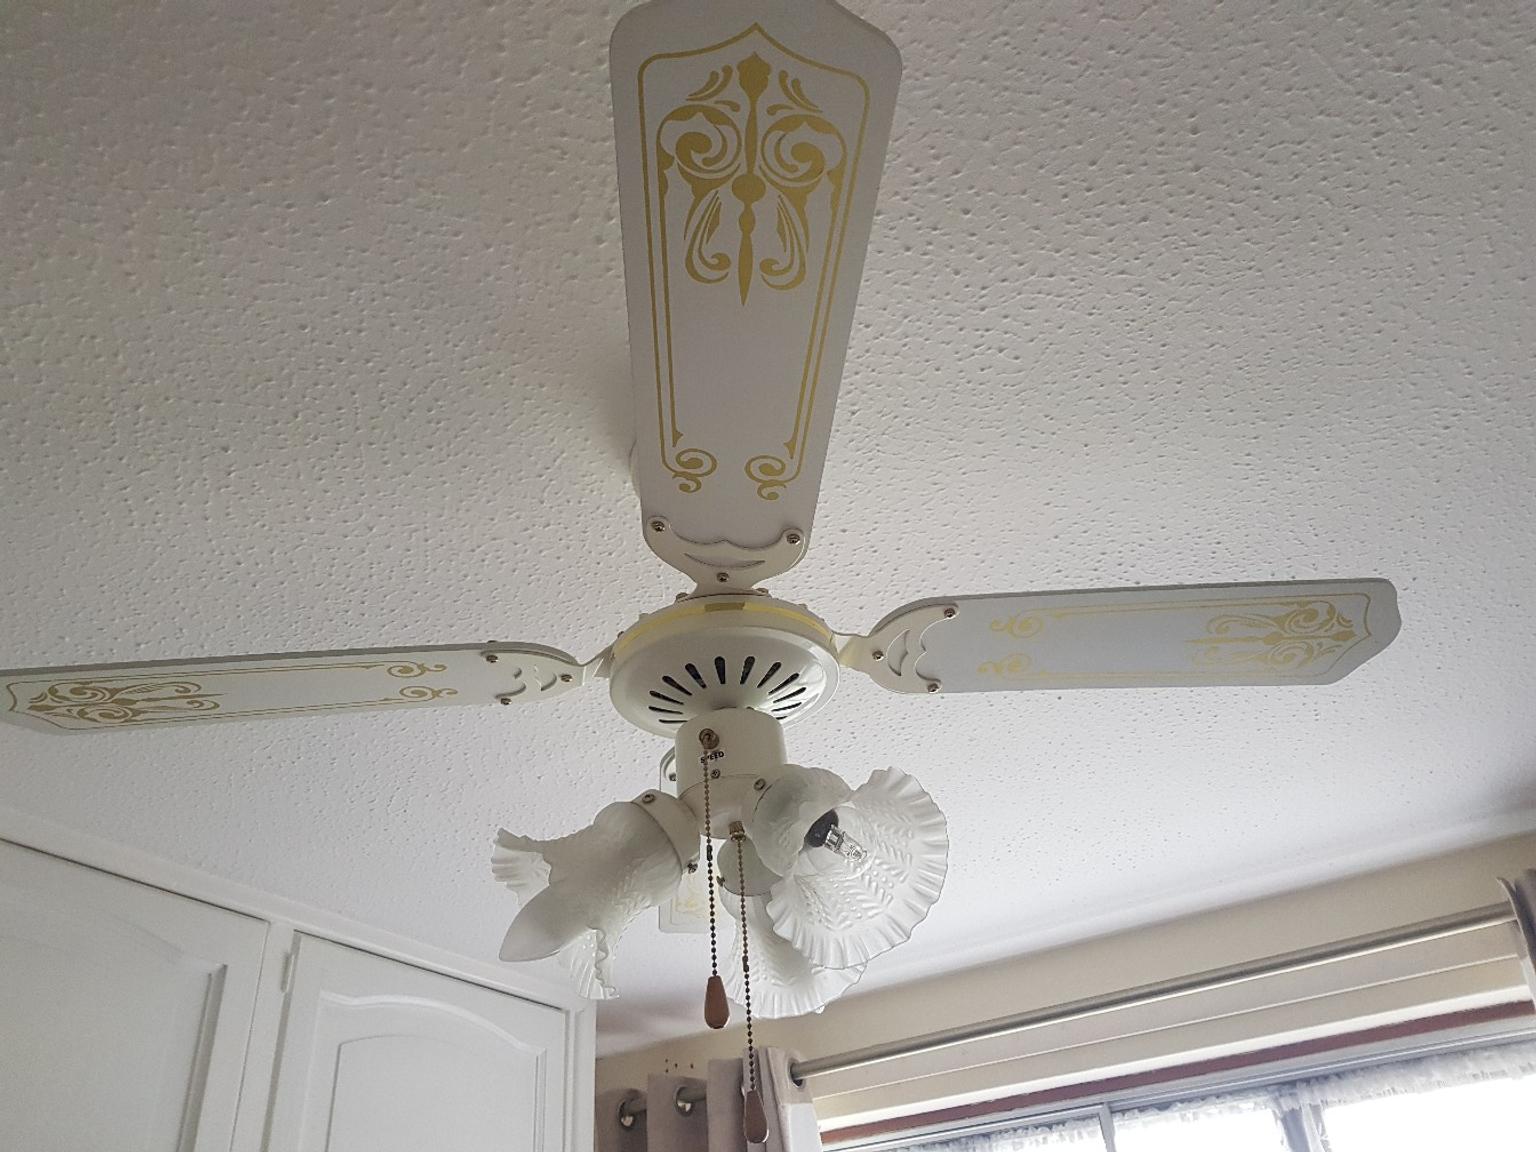 Ceiling Light Fan In Rg18 Thatcham For 10 00 For Sale Shpock